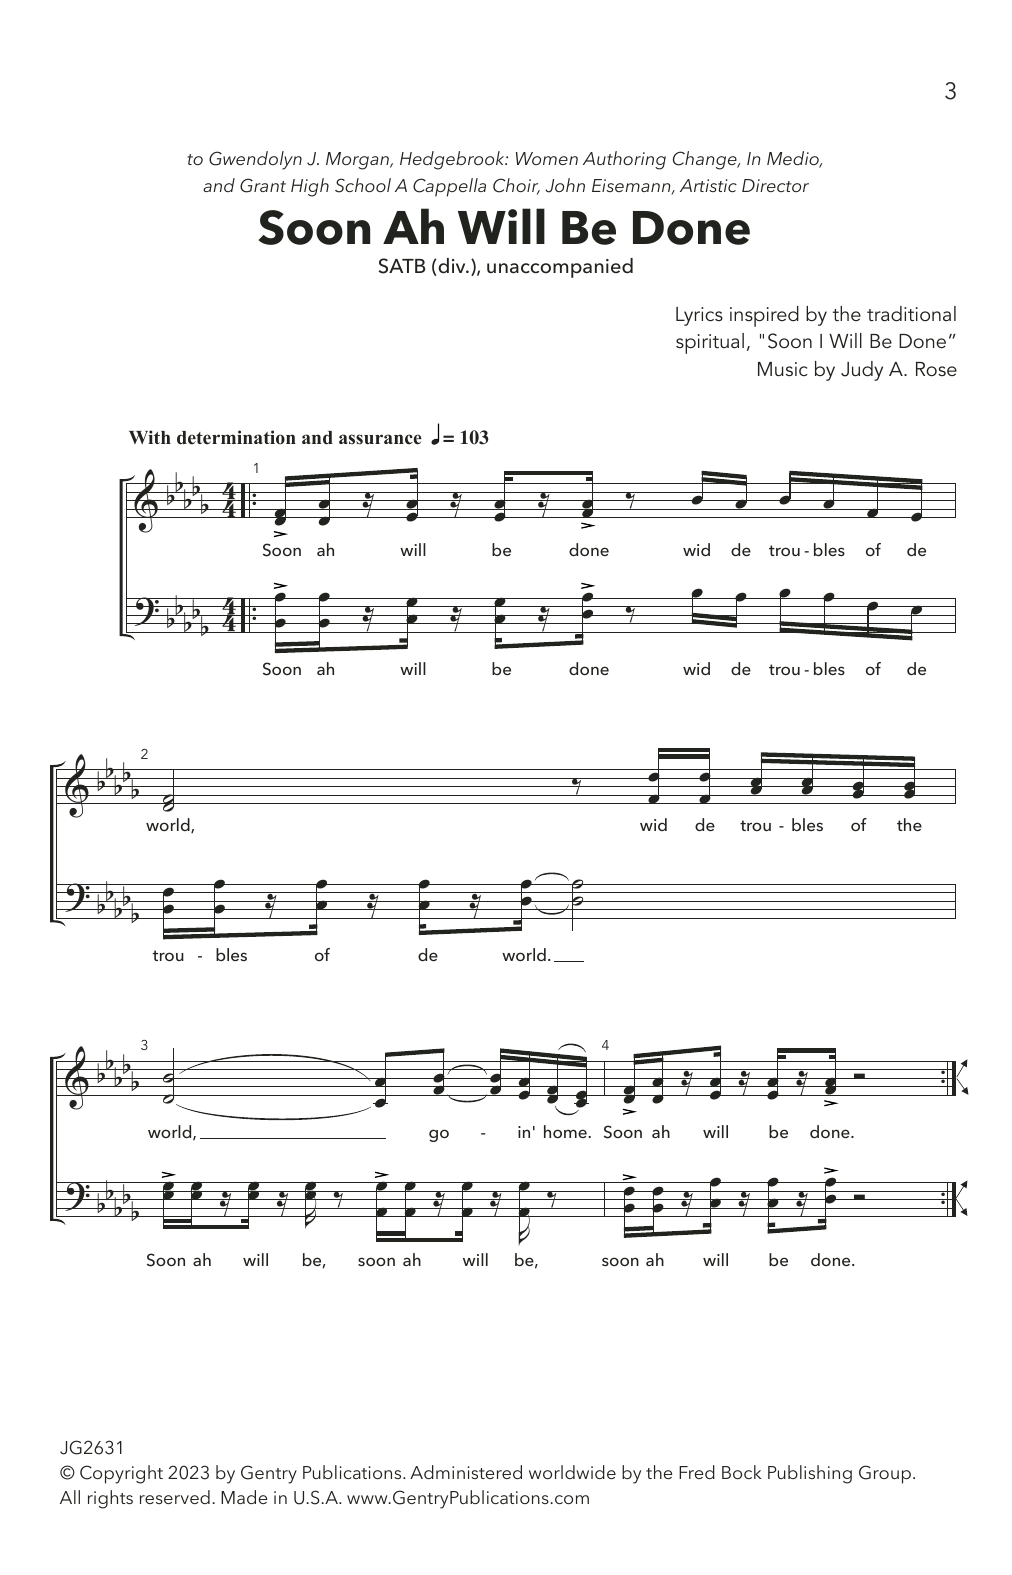 Download Judy A. Rose Soon Ah Will Be Done Sheet Music